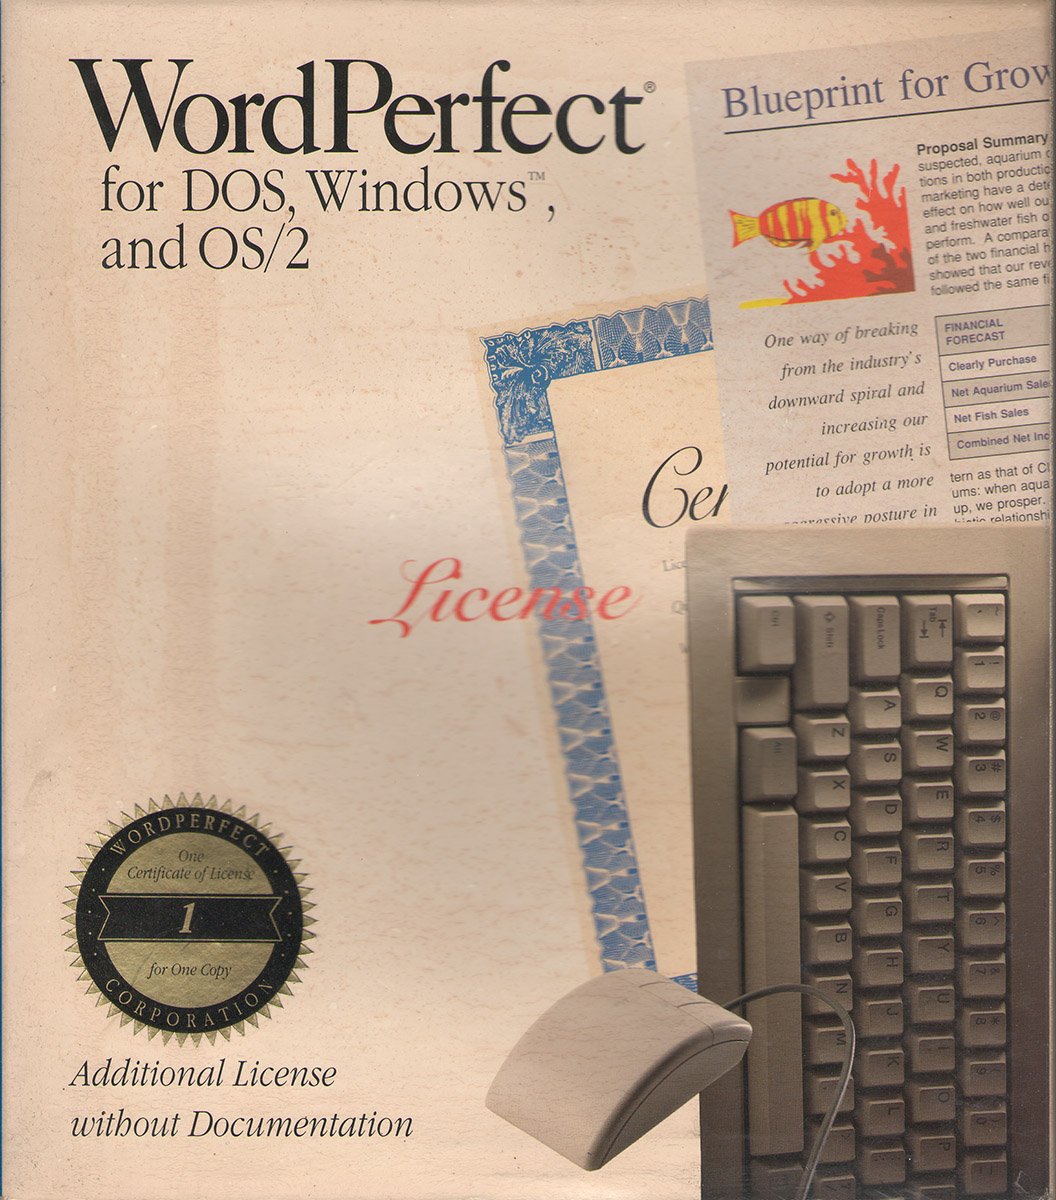 WordPerfect, released in 1979, was one of the first really successful word processing packages: the use of printer drivers helped it connect with a range of peripherals, however the user manual was 600 pages long!